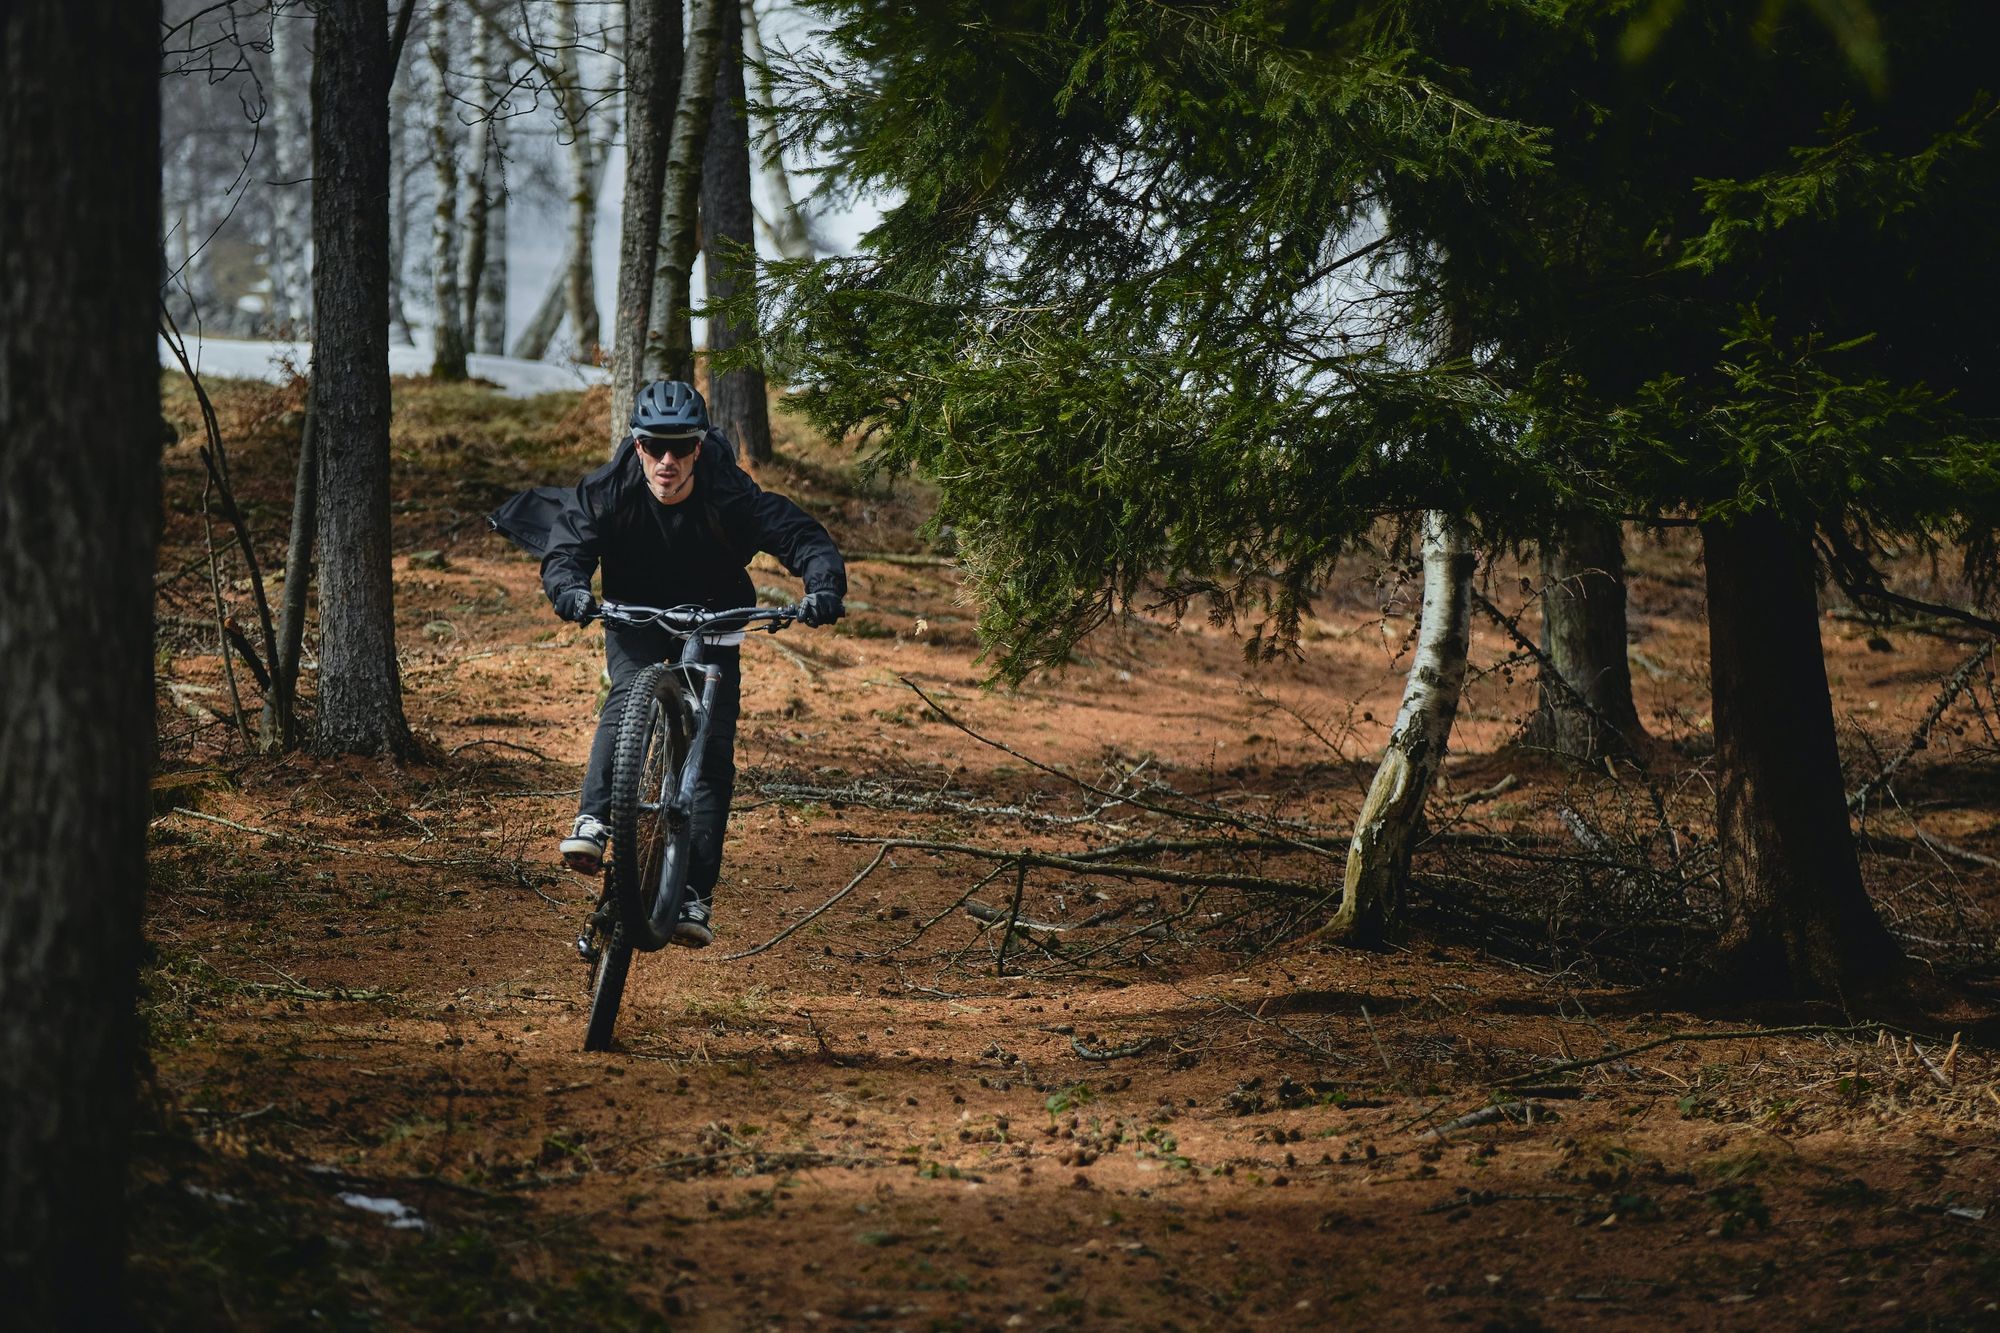 5 Tips For Starting E-MTB: How to make the most of your electric mountain bike